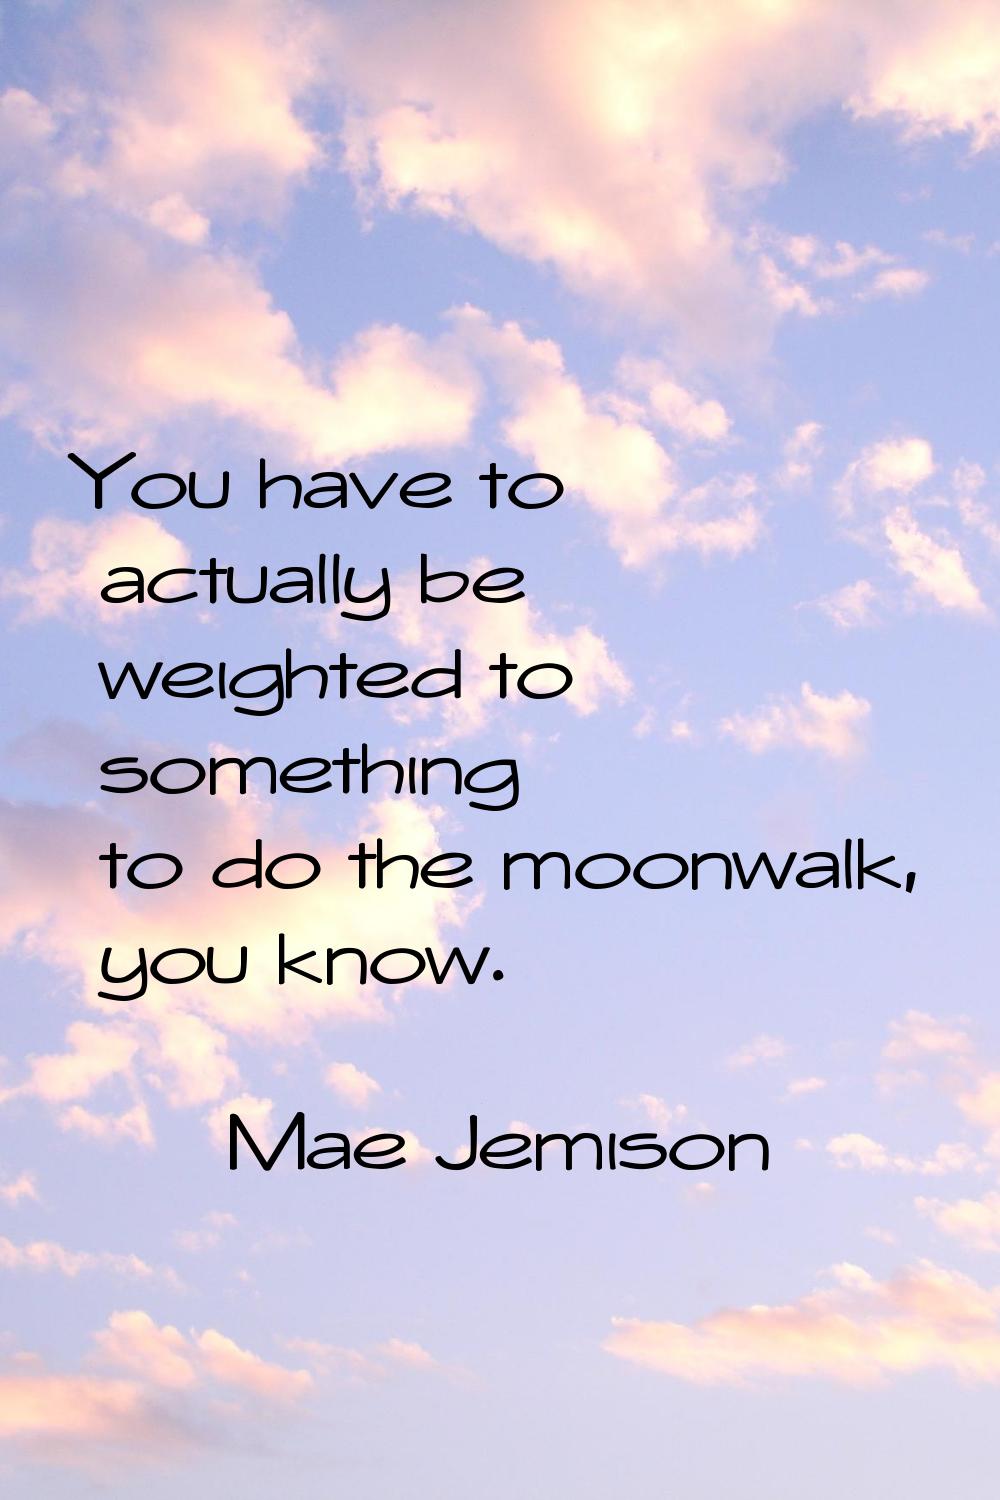 You have to actually be weighted to something to do the moonwalk, you know.